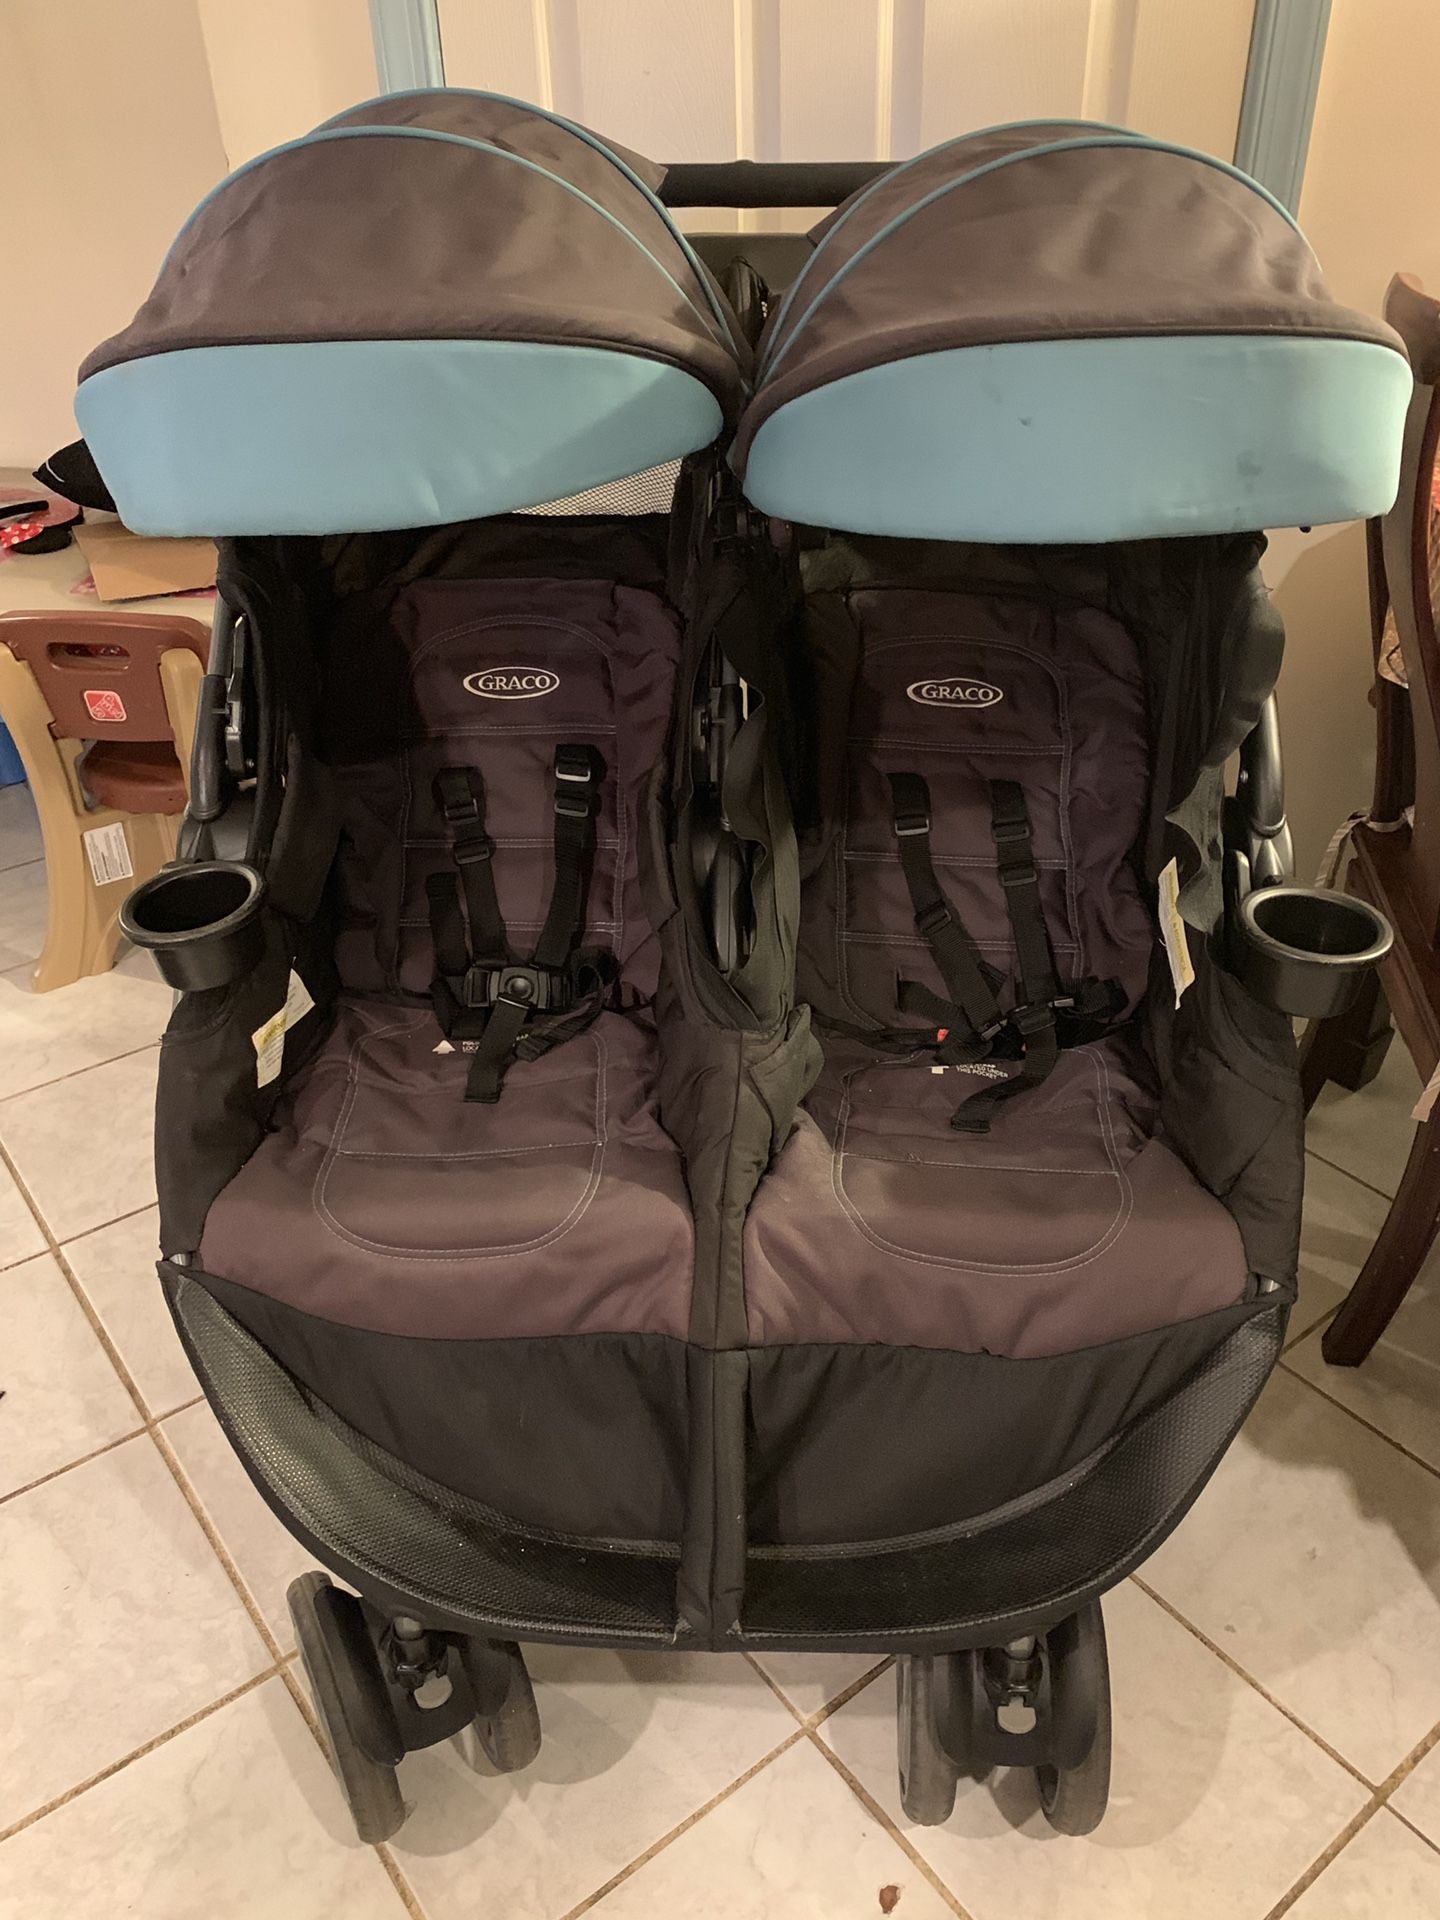 Greco double stroller